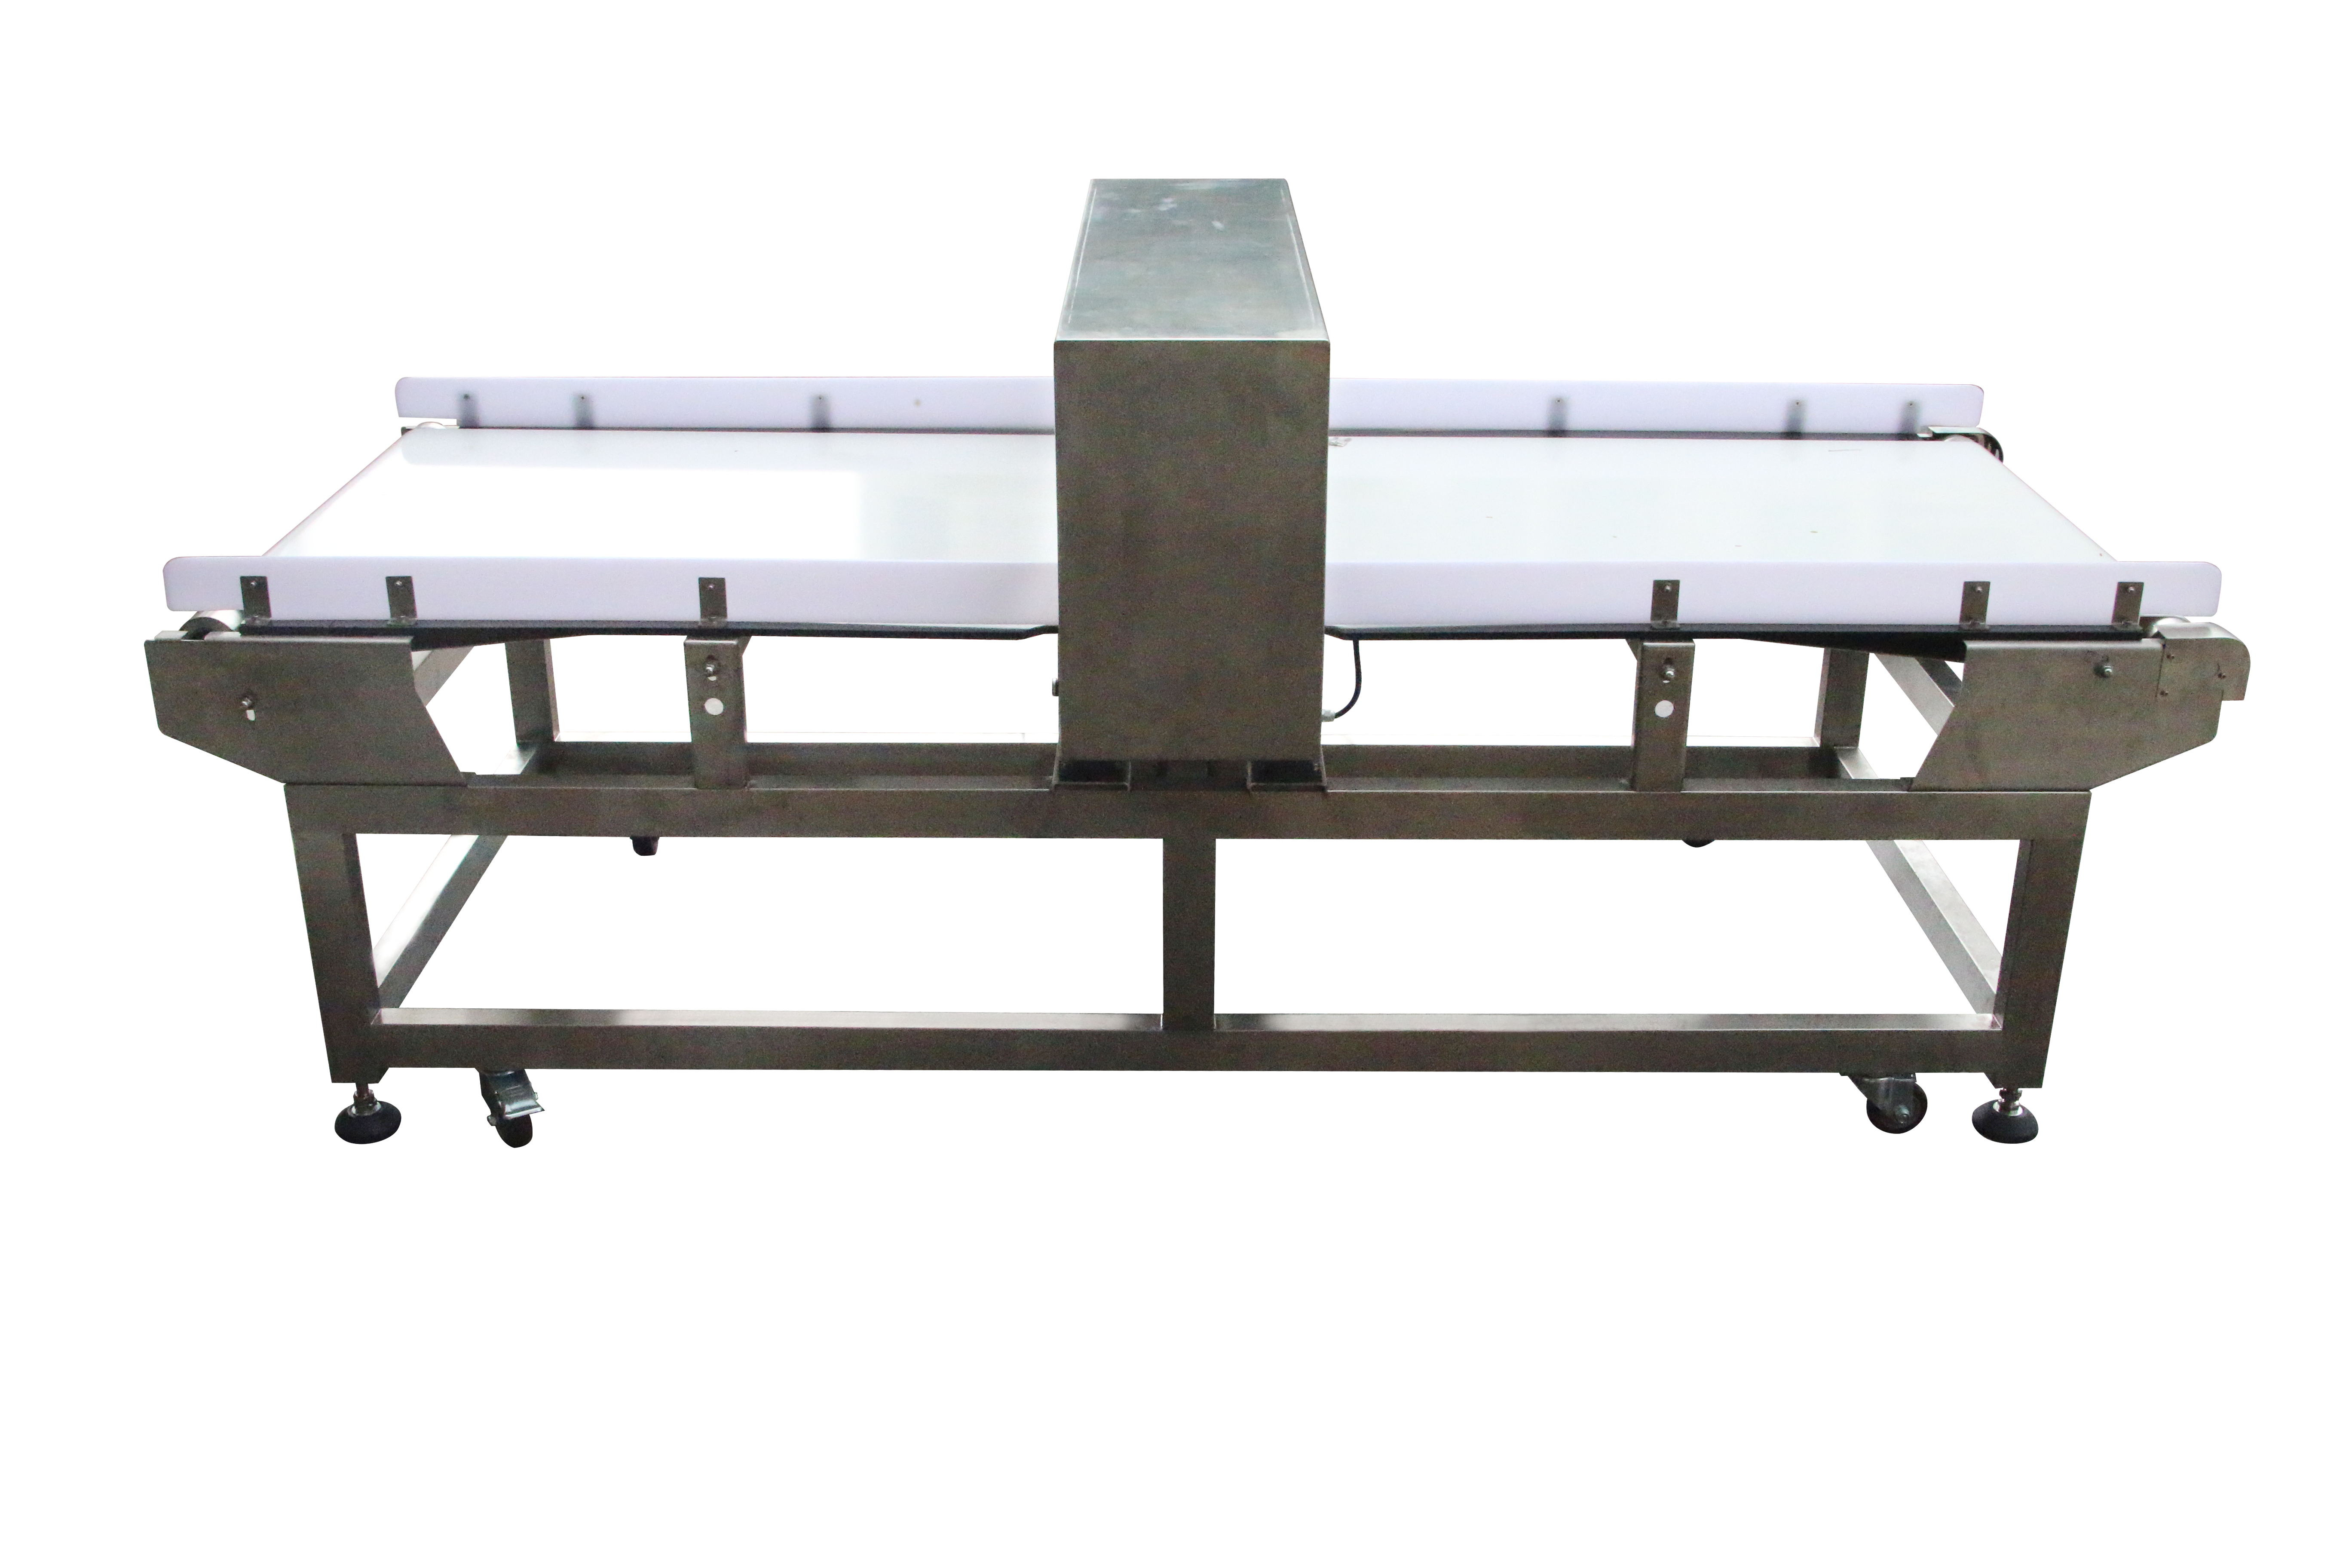 Pipe feed metal detector for sauce industry